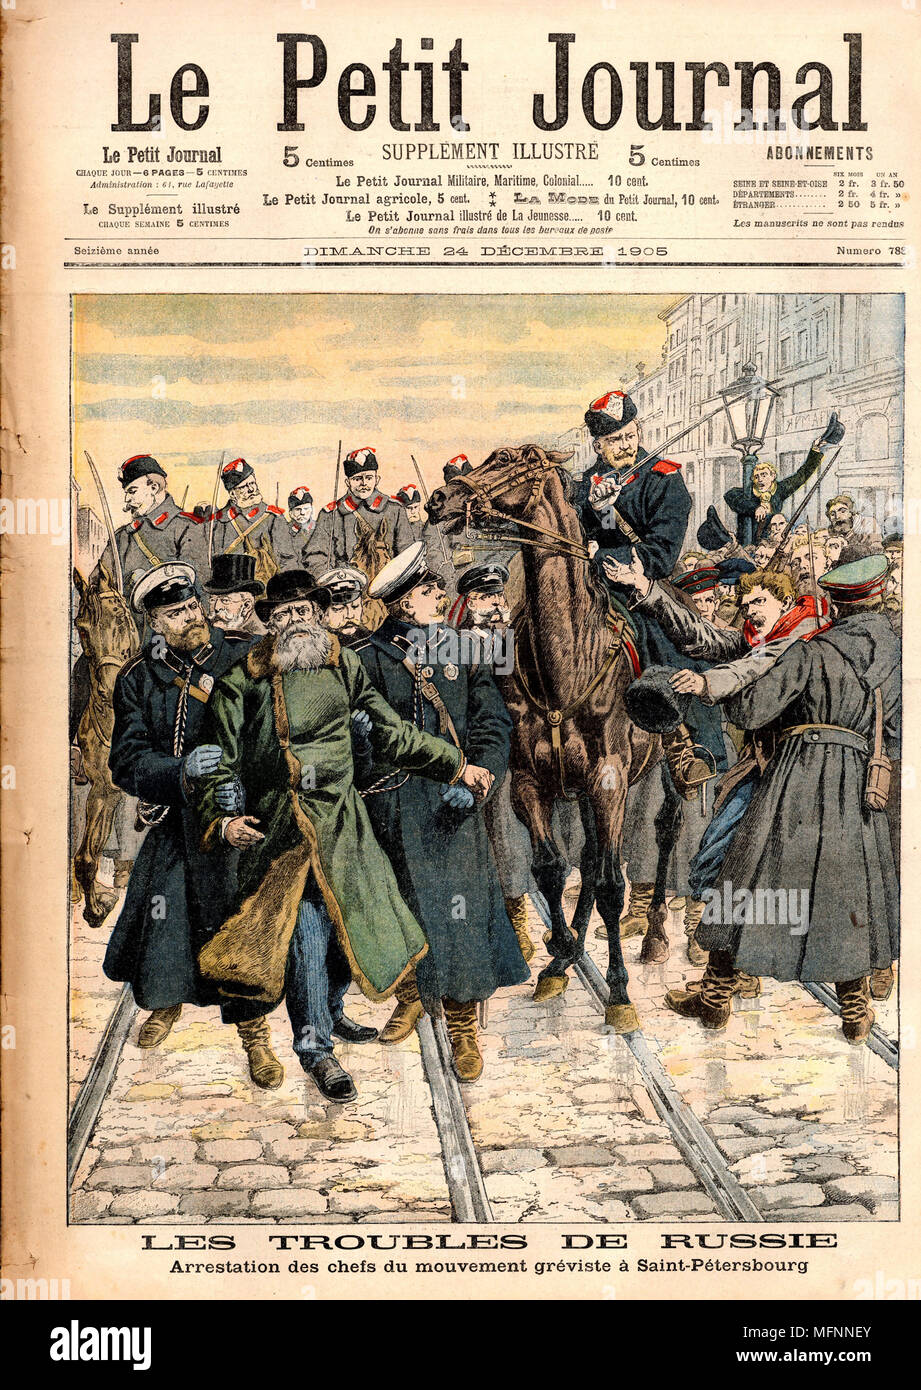 Unrest in Russia: Revolutionary uprisings in 1905. The arrest of a strike leader in St Petersburg at the end of the 1905 uprisings.  From 'Le Petit Journal', Paris, 24 December 1905. Stock Photo